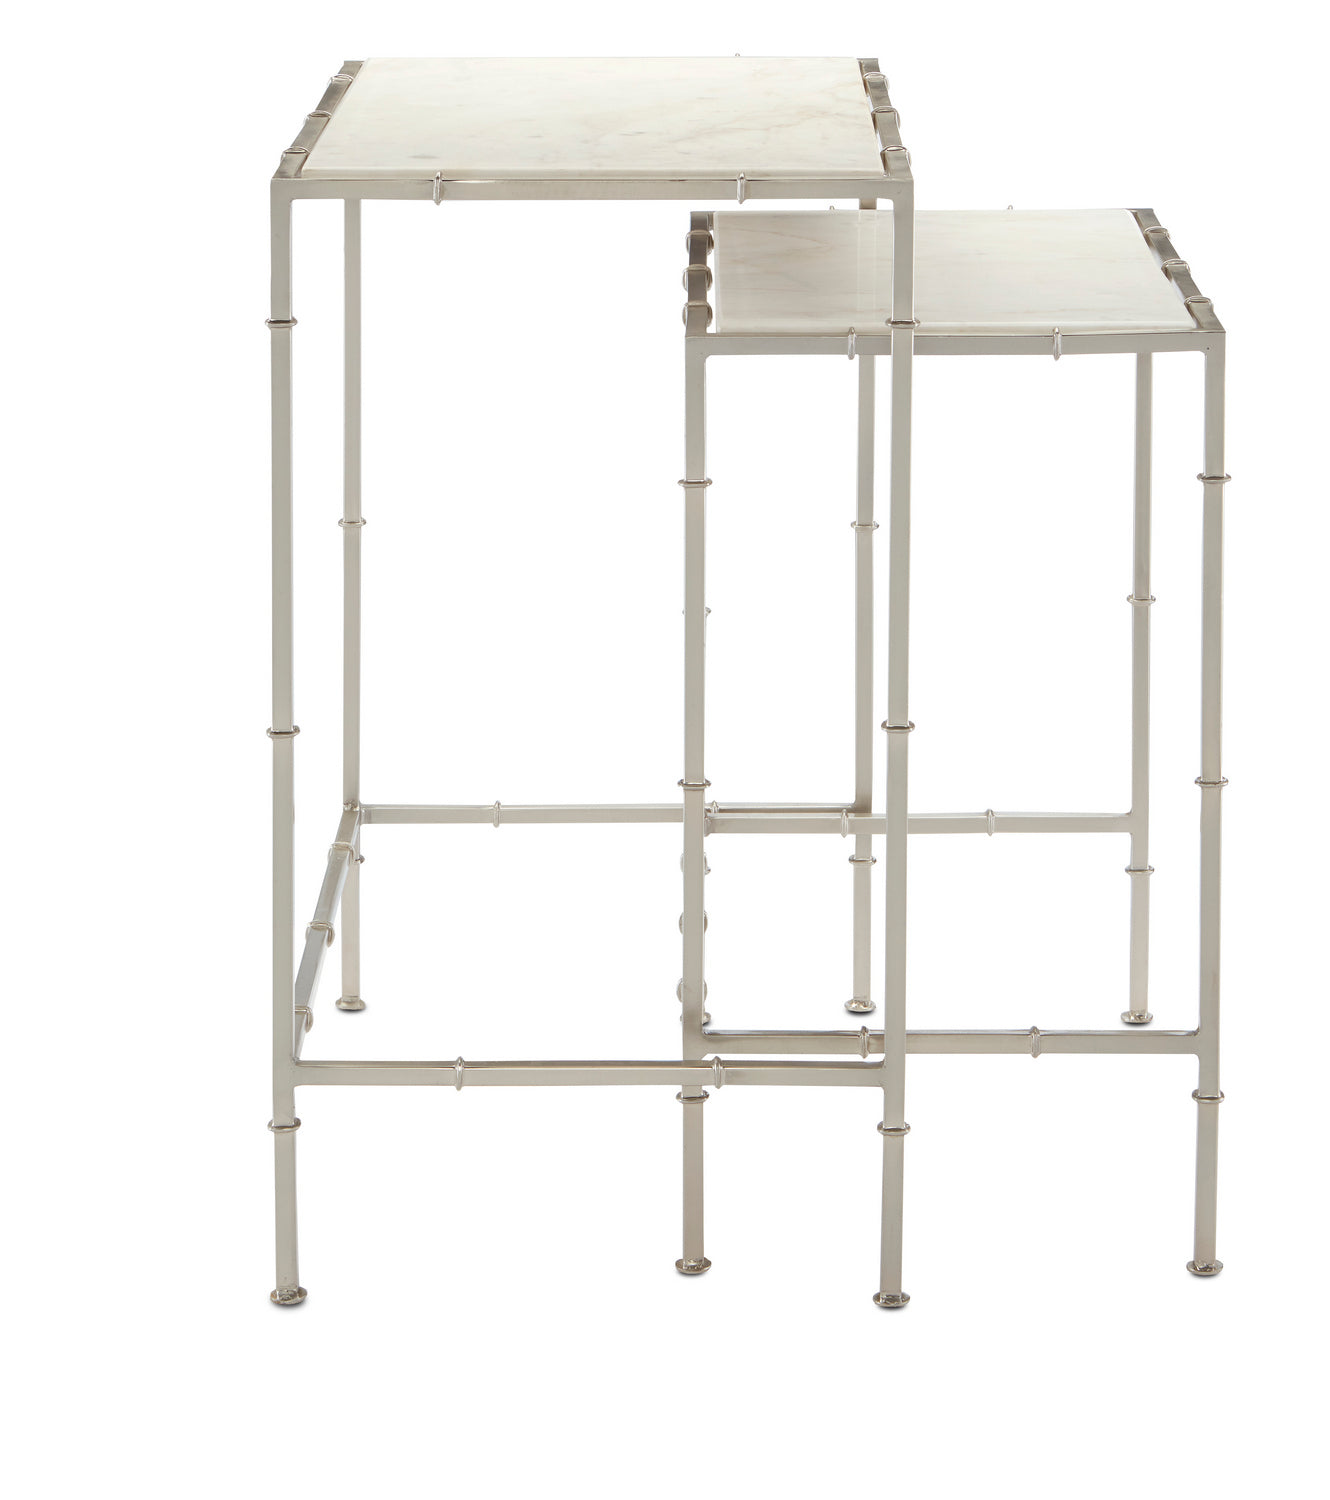 Nesting Table Set of 2 from the Harte collection in Nickel/White finish